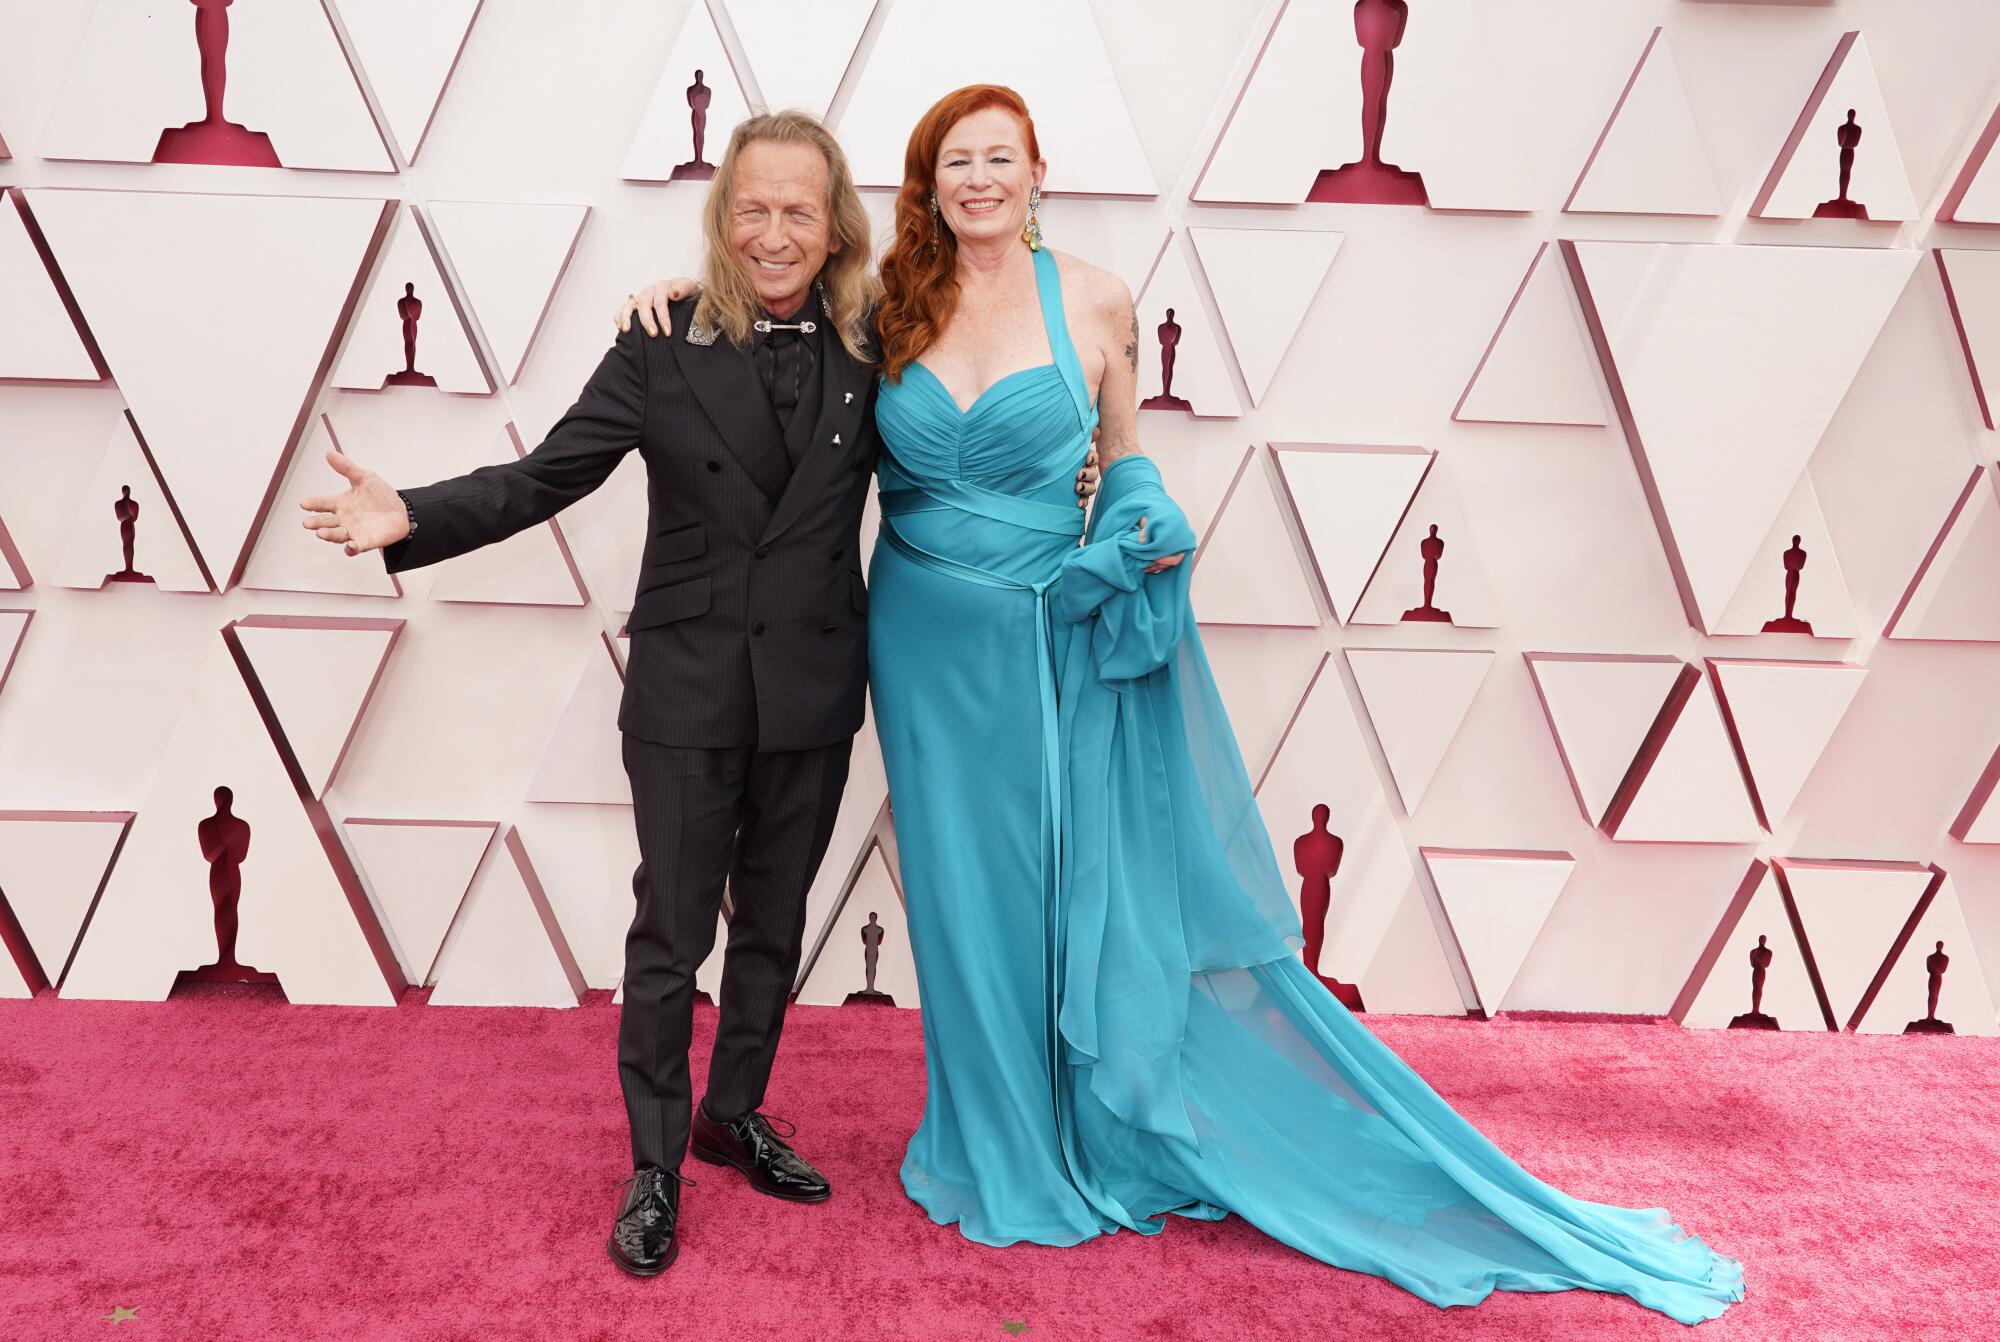 Paul Raci in a black outfit and Liz Hanley Raci in a blue gown with train at the Oscars. 